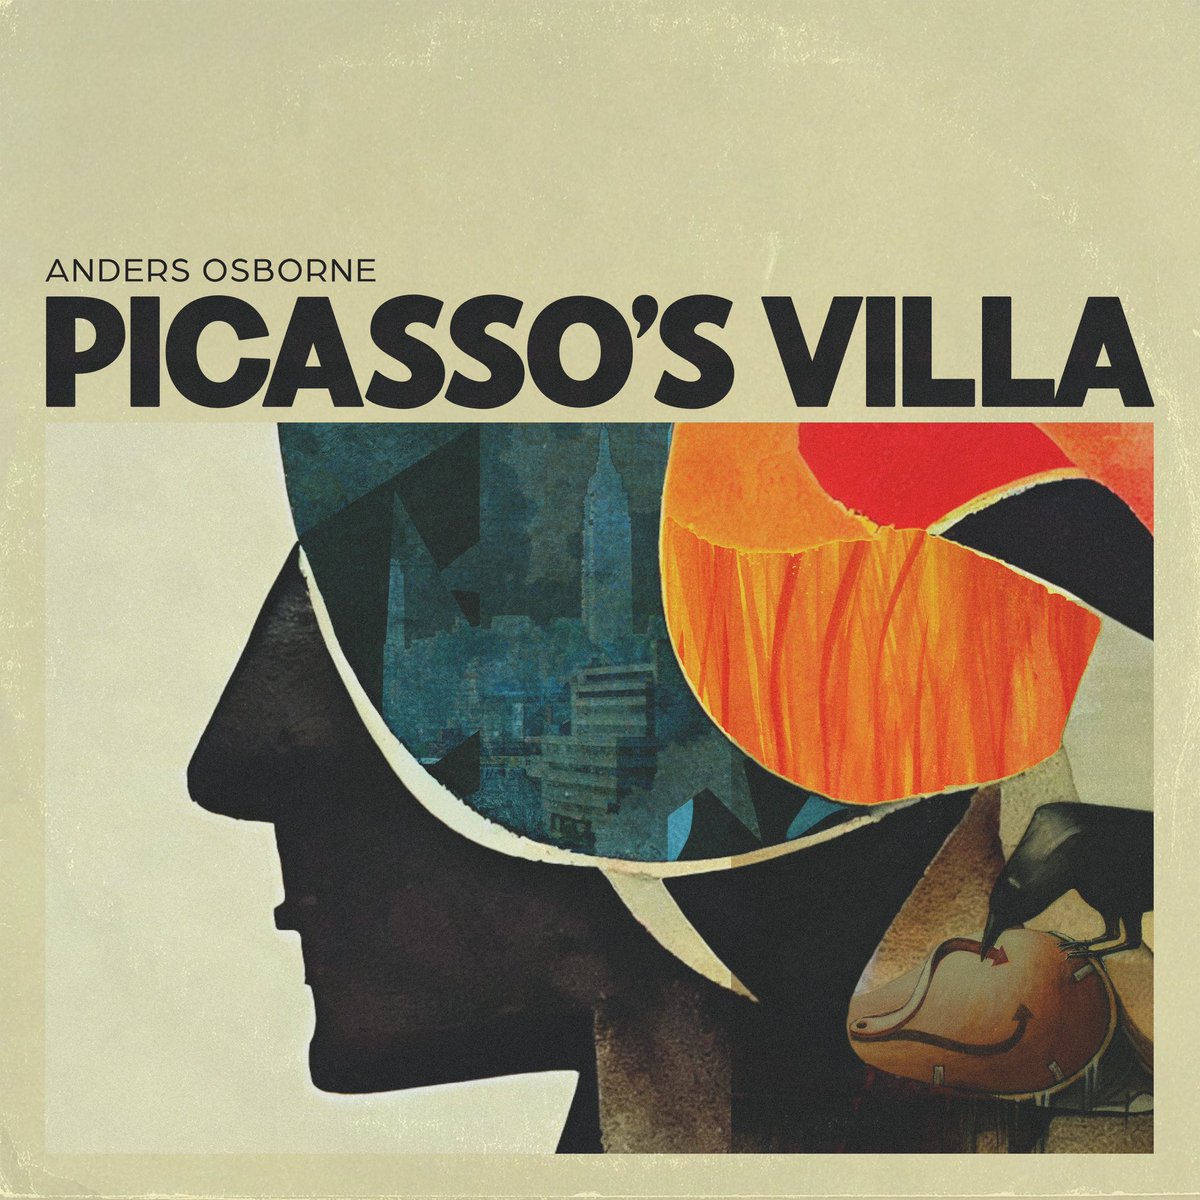 My new album “Picasso’s Villa” will be out on April 26th! Pre-save the album and listen to my single “Bewildered” and the links below! 🎸 Pre-save “Picasso’s Villa”: orcd.co/picassosvilla Listen to “Bewildered”: orcd.co/aobewildered